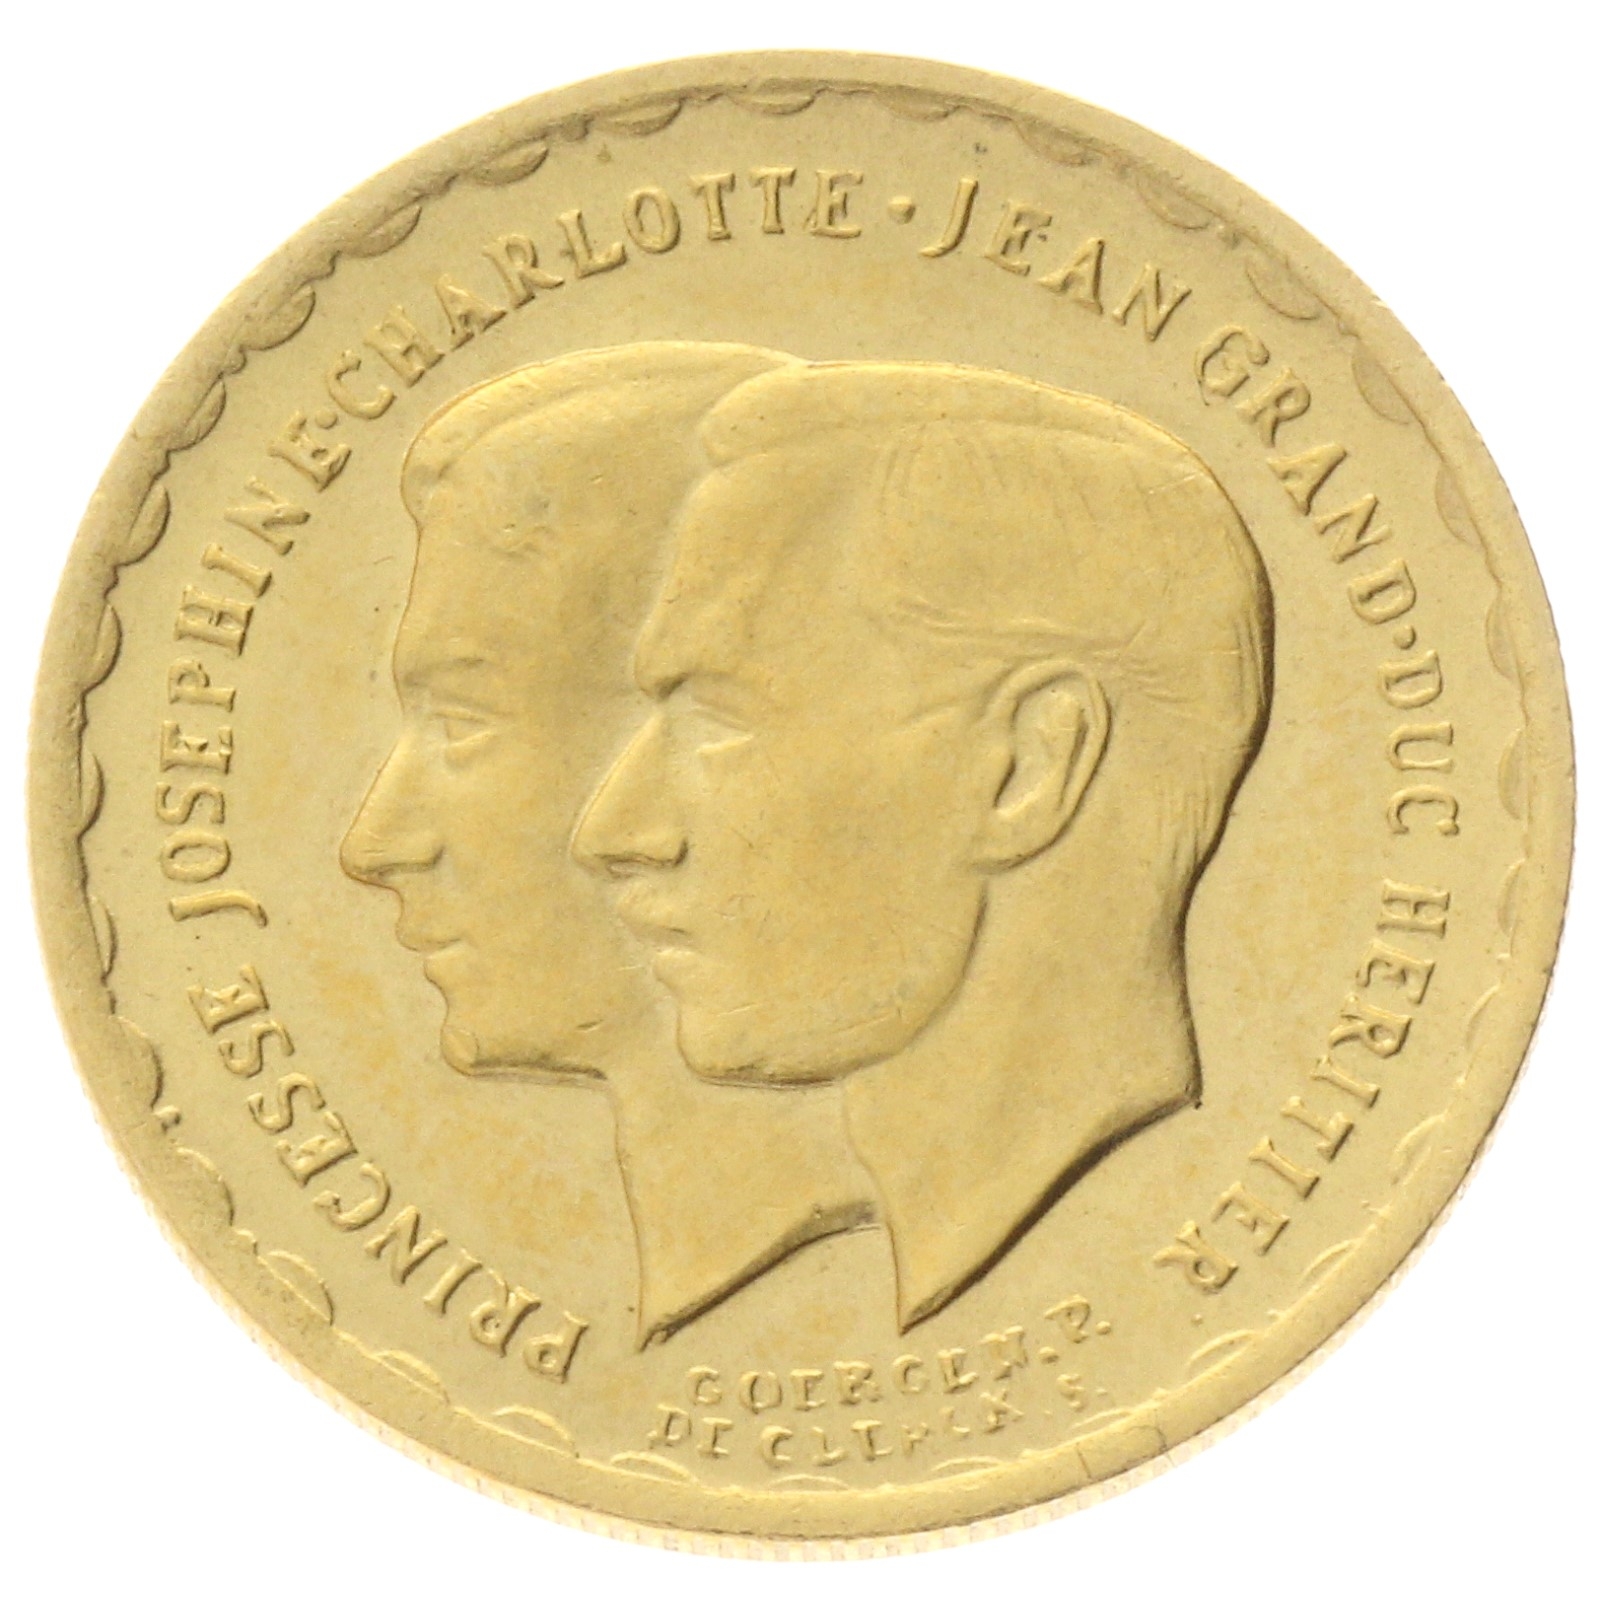 Luxembourg - 20 Francs - 1953 - Marriage Commemorative